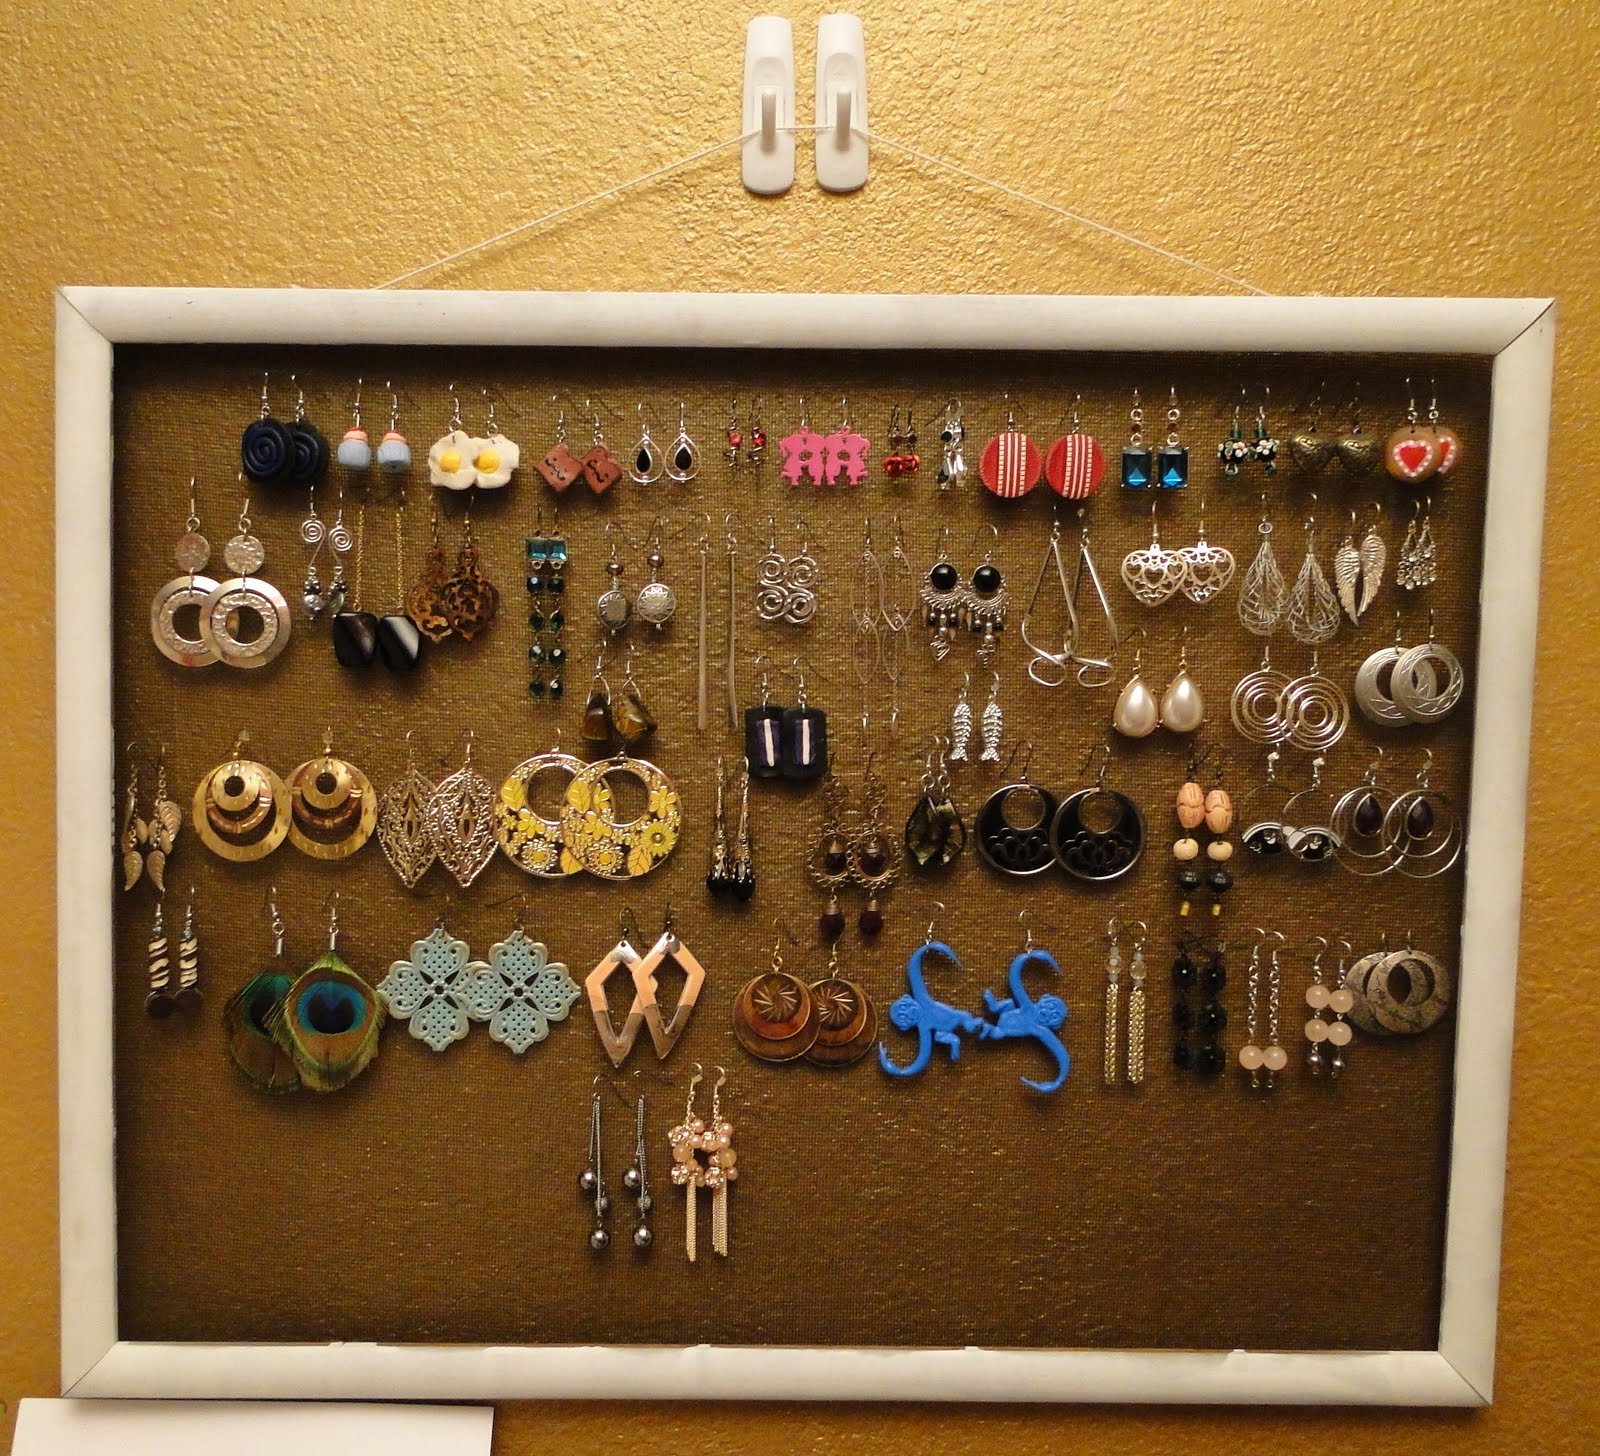 Holder earring necklace display organize jewelry earrings simple fun avoid beautifully quick create